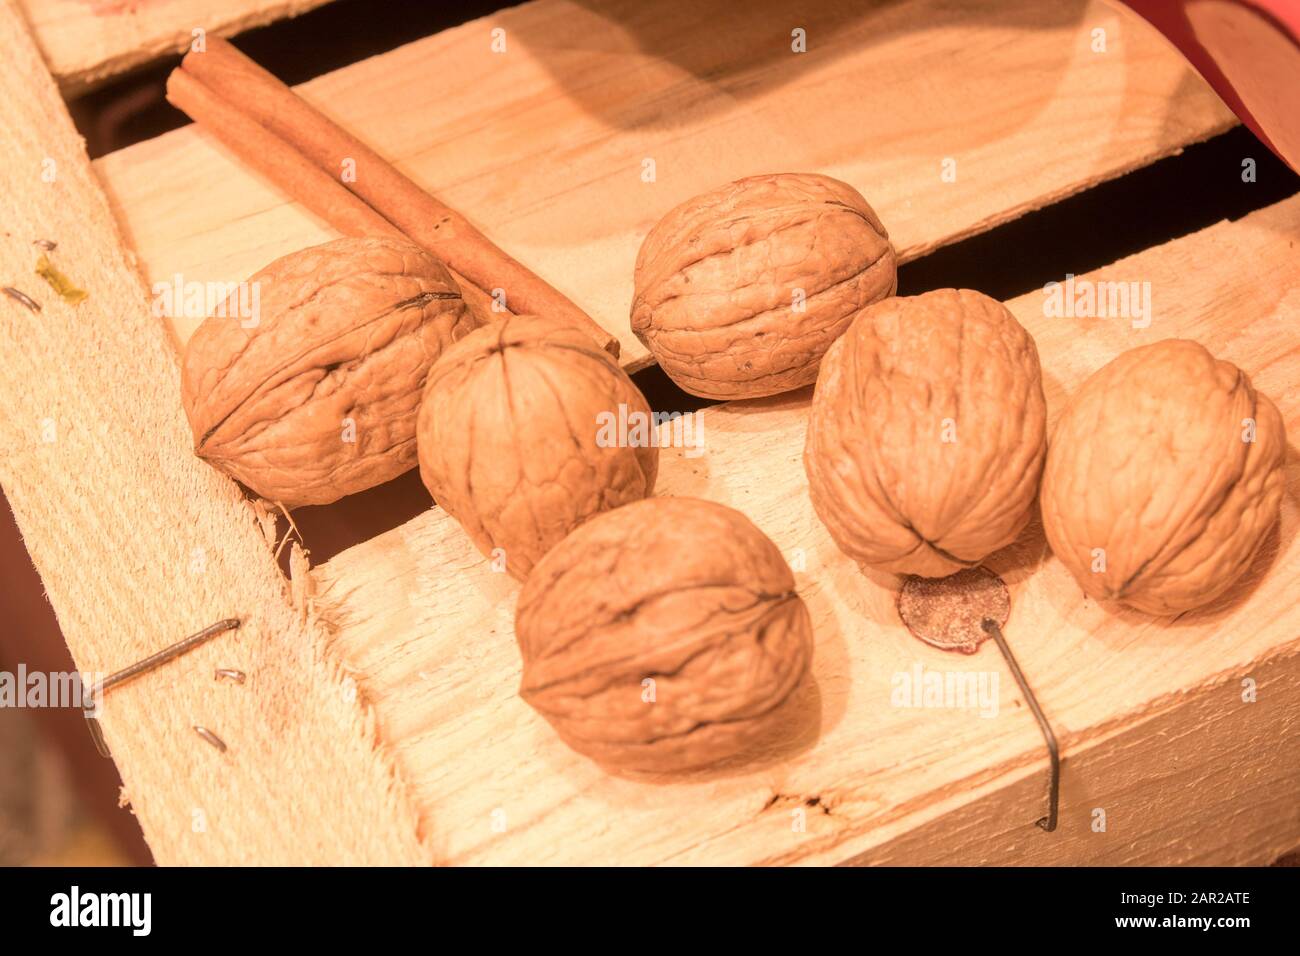 a walnut is the large wrinkled edible seed of a deciduous tree, consisting of two halves contained within a hard shell that is enclosed in a green fru Stock Photo